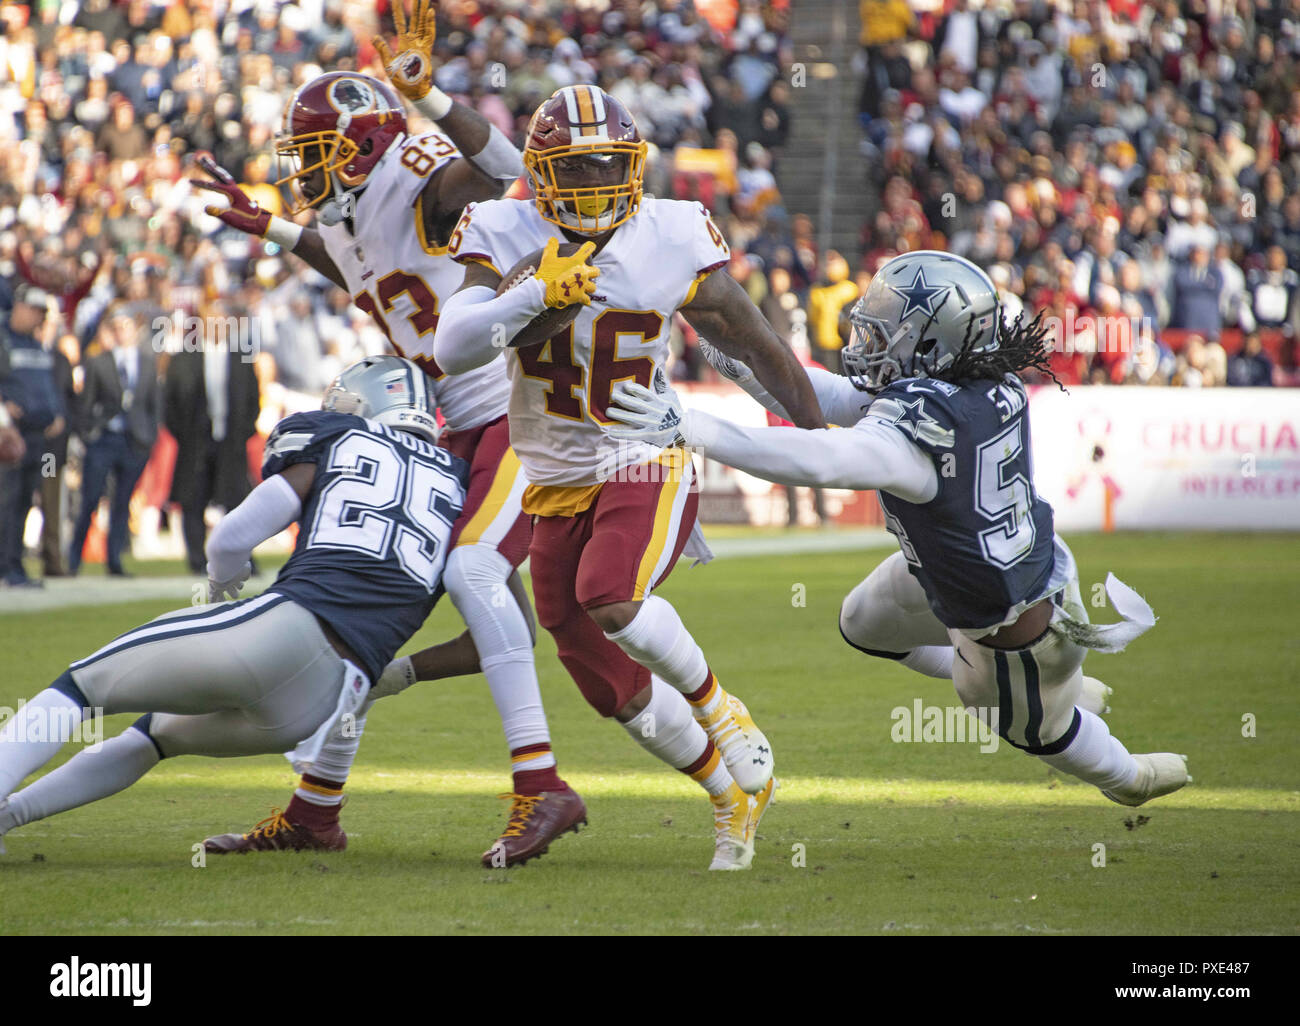 Landover, Maryland, USA. 21st Oct, 2018. Washington Redskins running back Kapri Bibbs (46) eludes an attempted tackle by Dallas Cowboys linebacker Jaylon Smith (54) as he runs for a touchdown in the first quarter at FedEx Field in Landover, Maryland on Sunday, October 21, 2018 Credit: Ron Sachs/CNP/ZUMA Wire/Alamy Live News Stock Photo